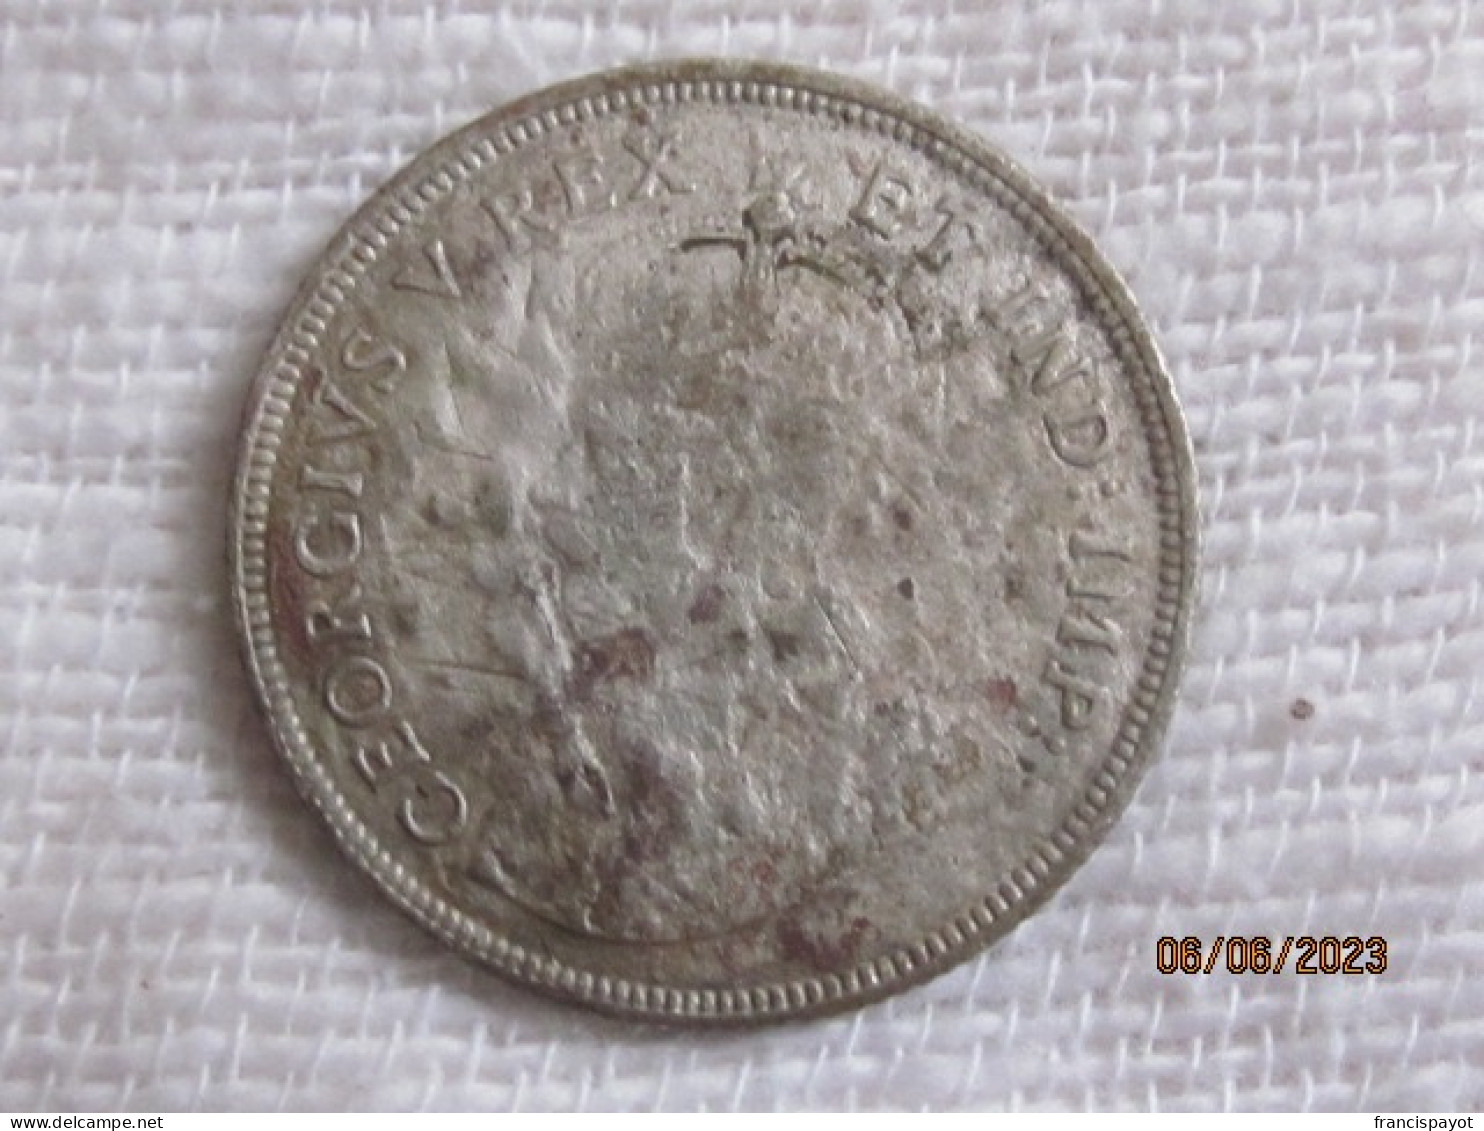 East Africa: 1 Shilling 1921 (silver) - British Colony